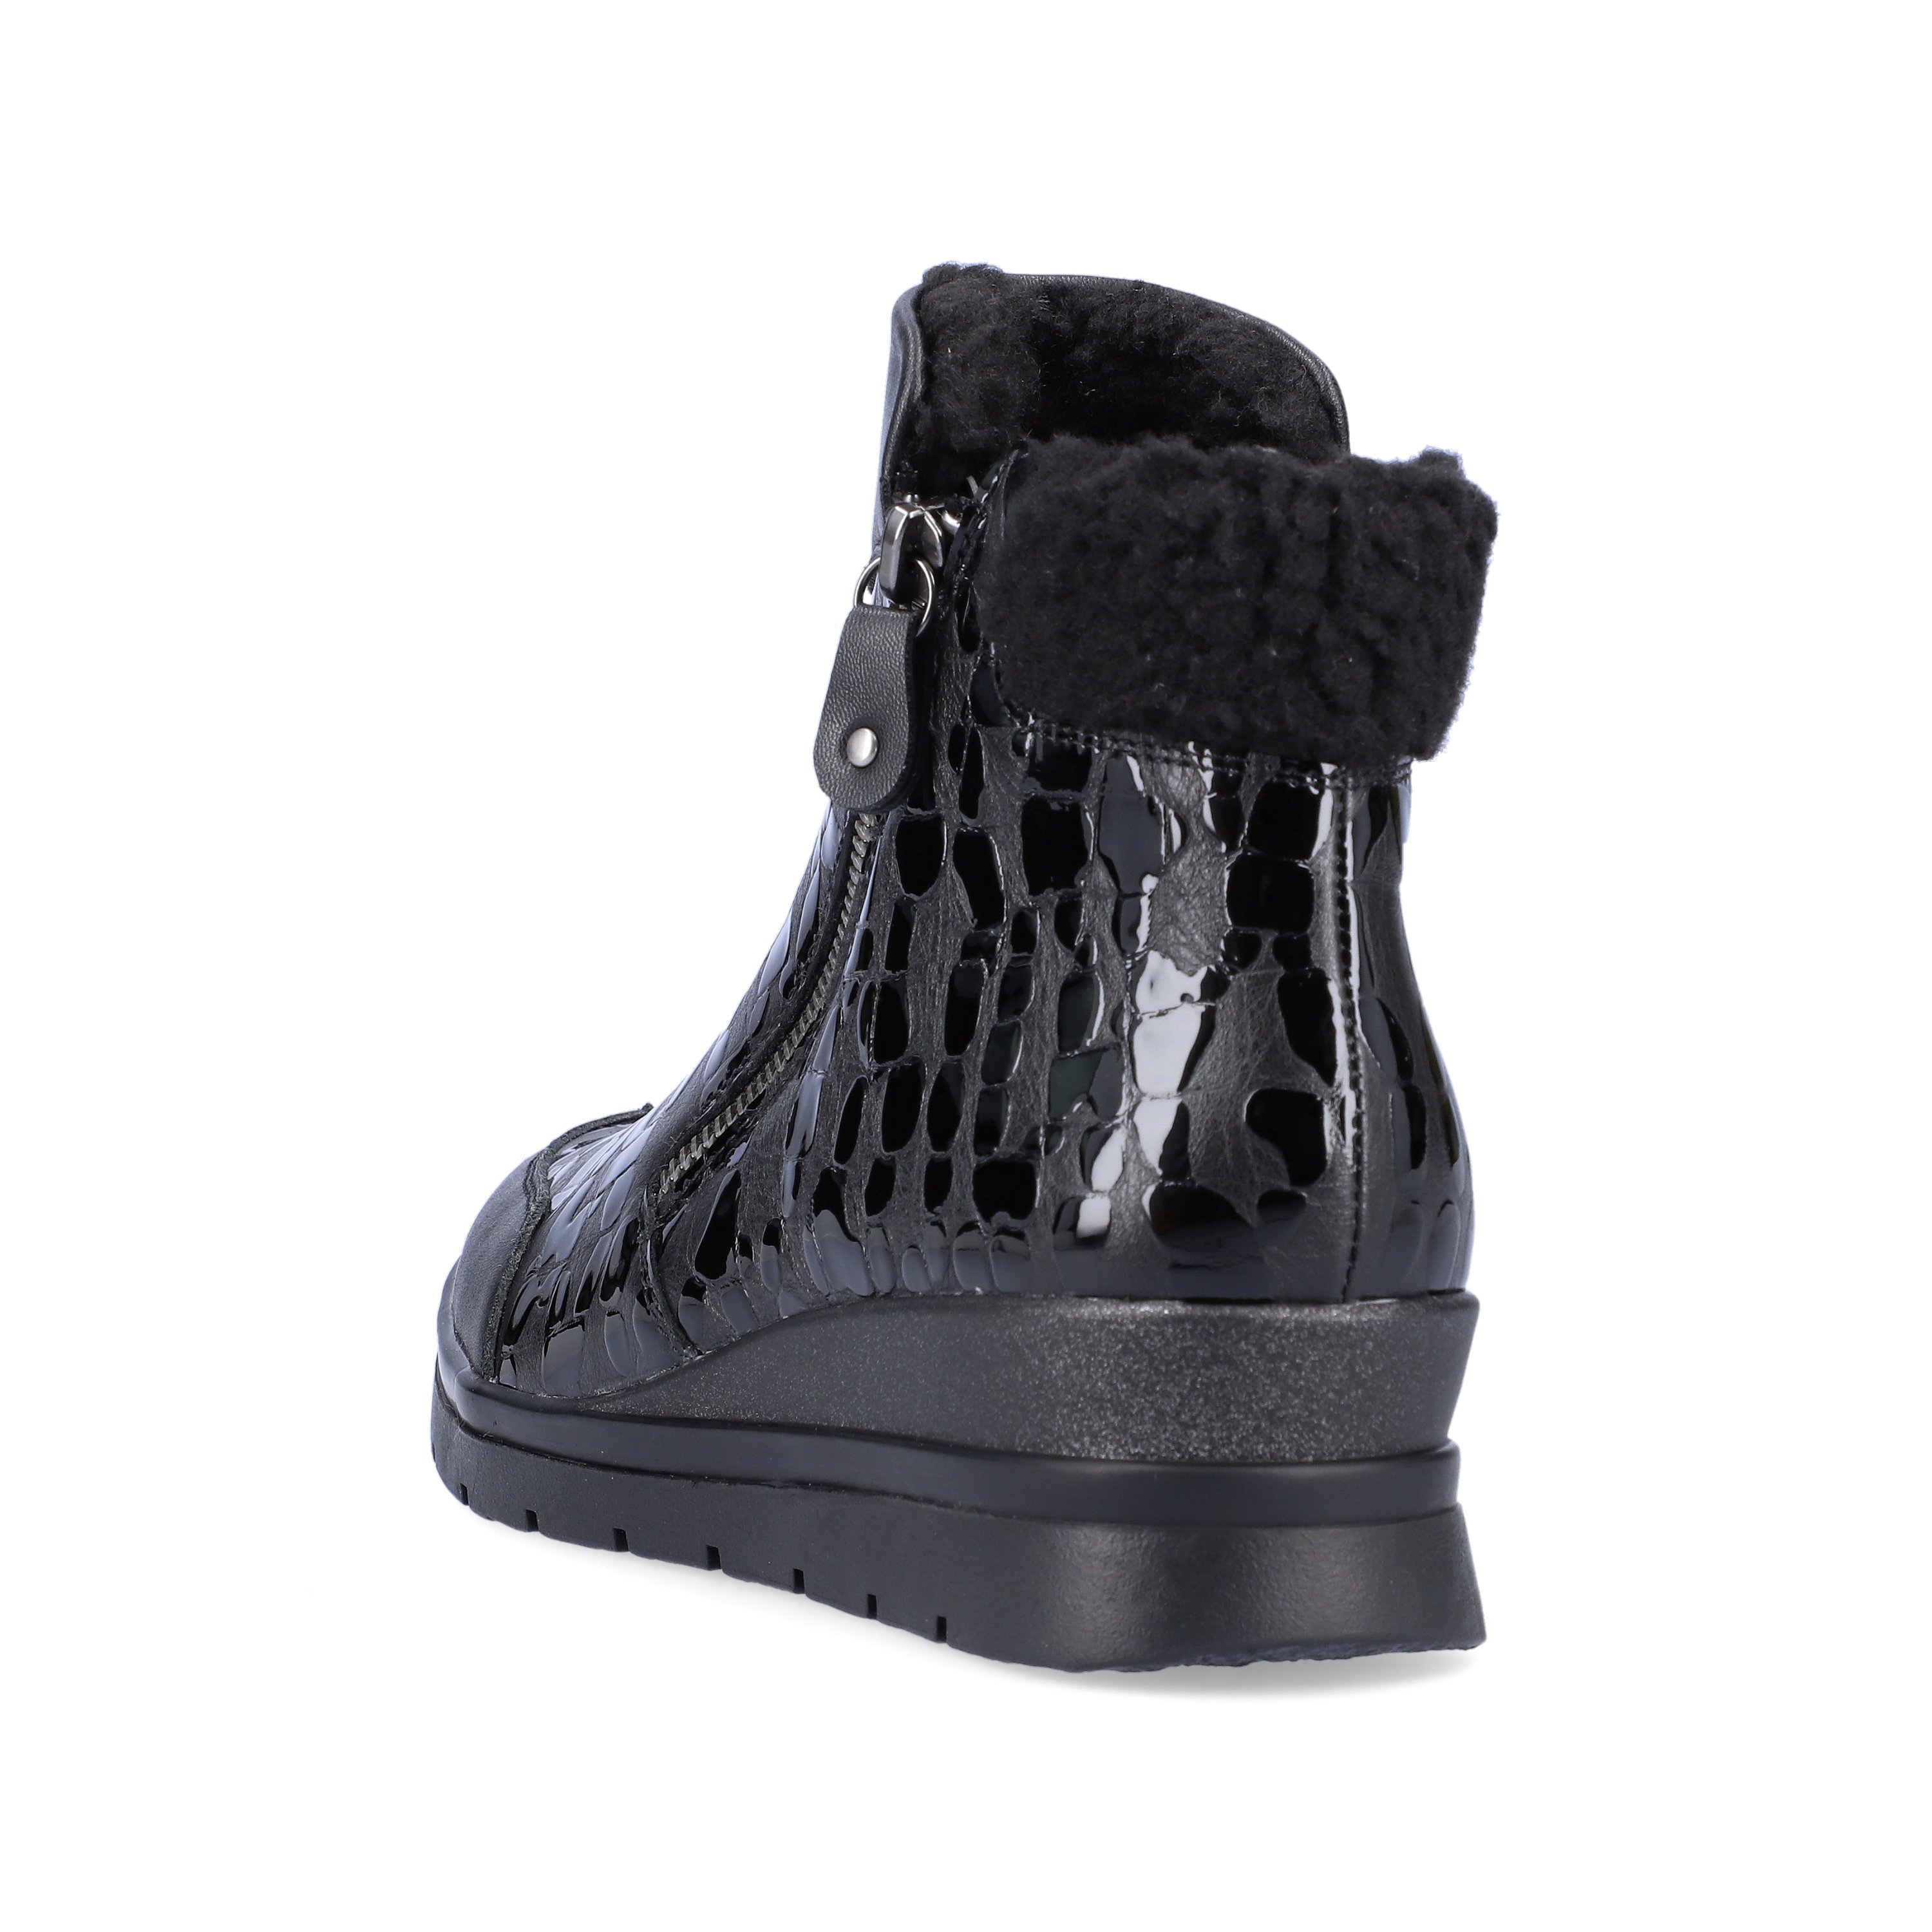 Glossy black remonte women´s ankle boots R0775-03 with flexible profile sole. Shoe from the back